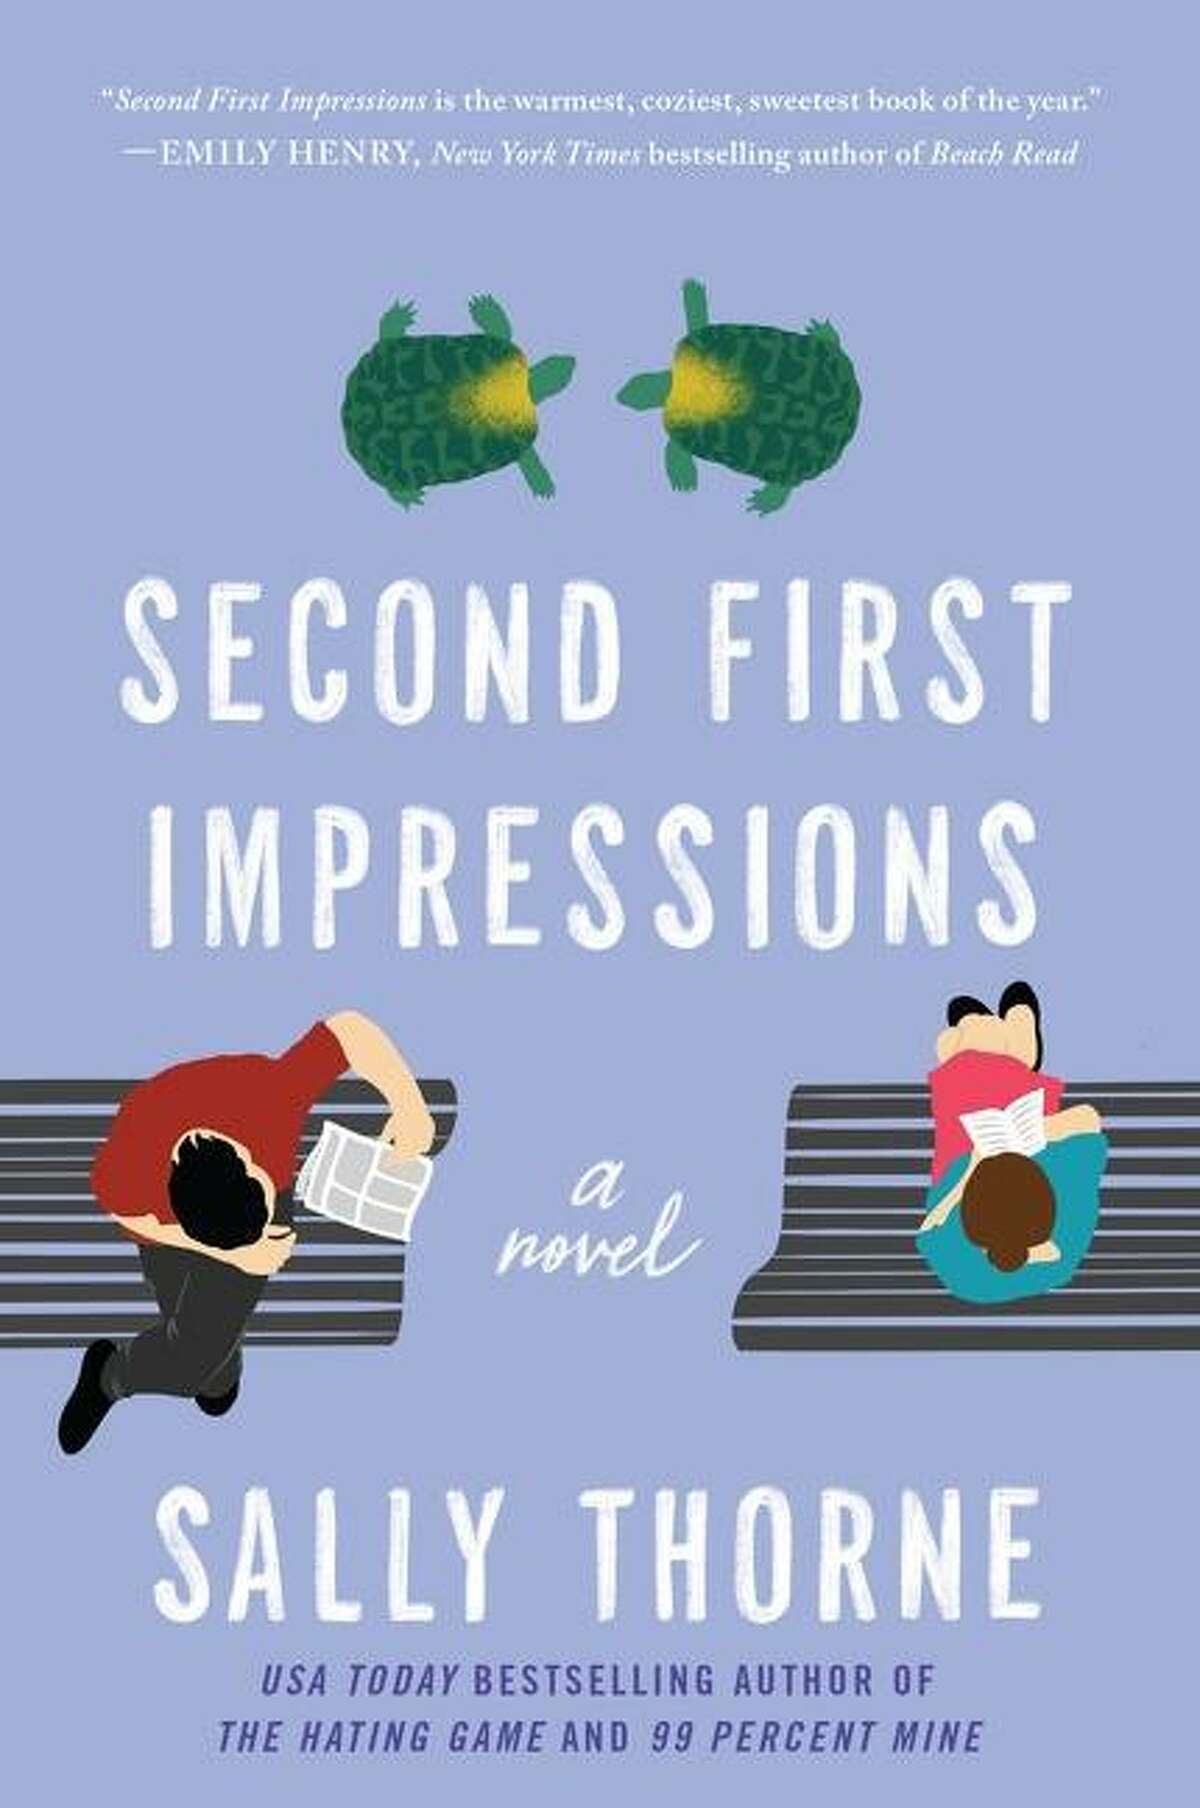 "Second First Impressions" is Sally Thorne's latest novel.